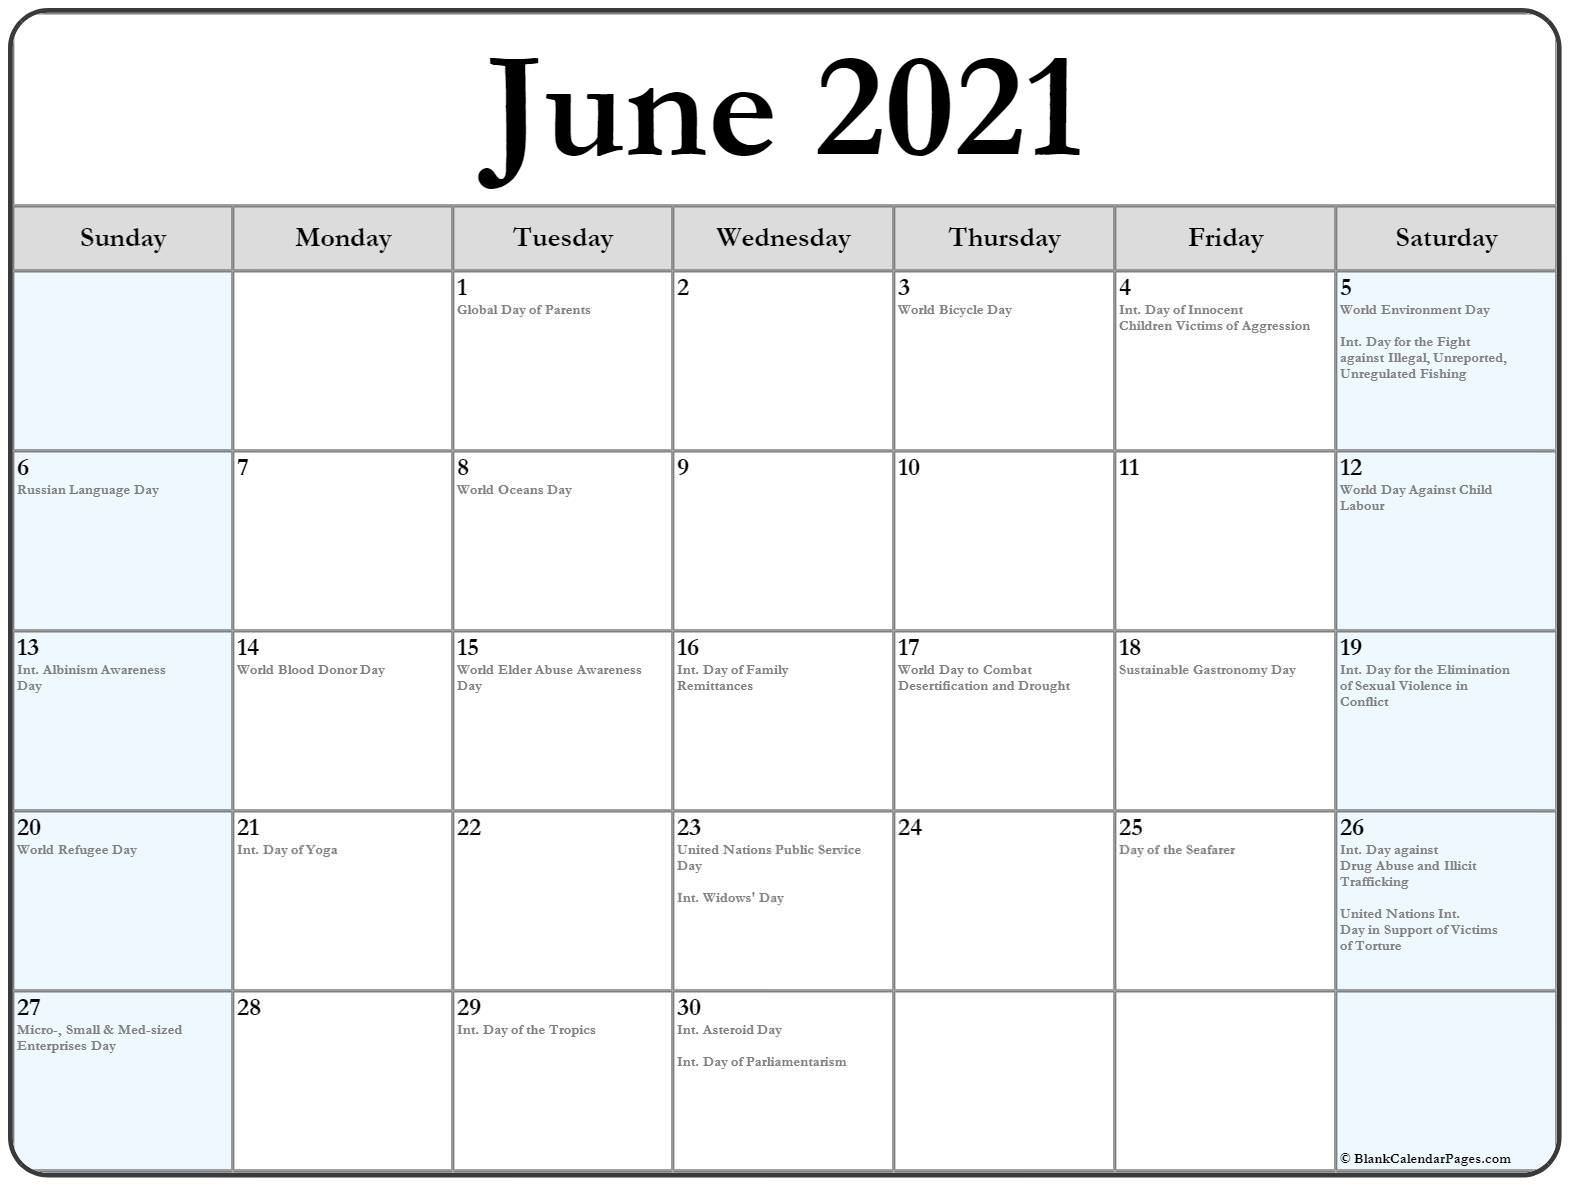 Collection Of June 2021 Calendars With Holidays June-August 2021 Calendar